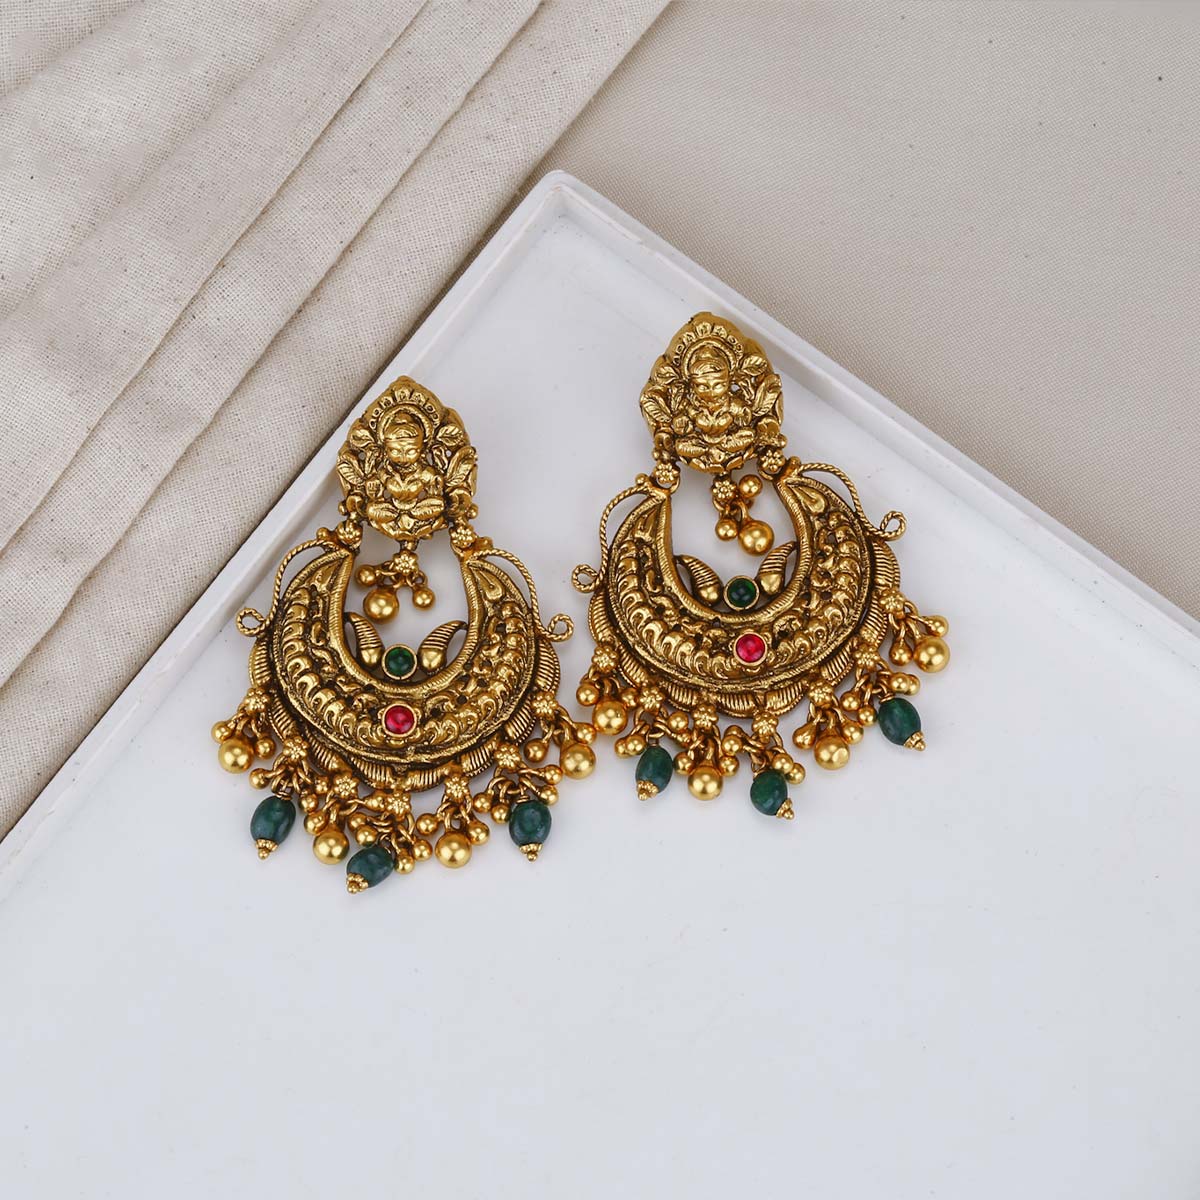 Buy Traditional Nagas Jewellery kemp stone antique jhumkas online shopping